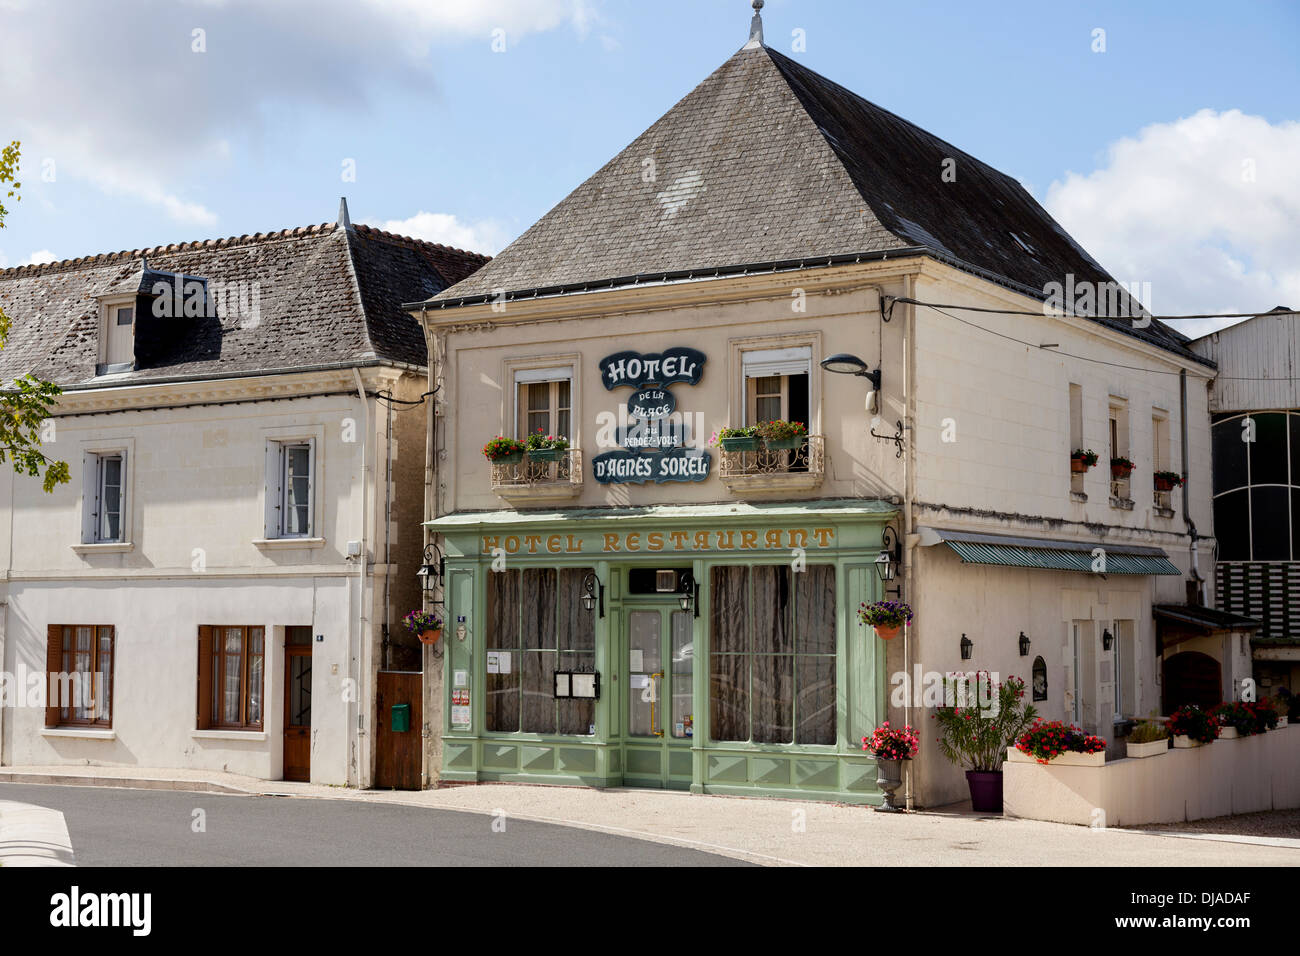 Hotel restaurant Agnes Sorel in the small French town of Genille Stock Photo